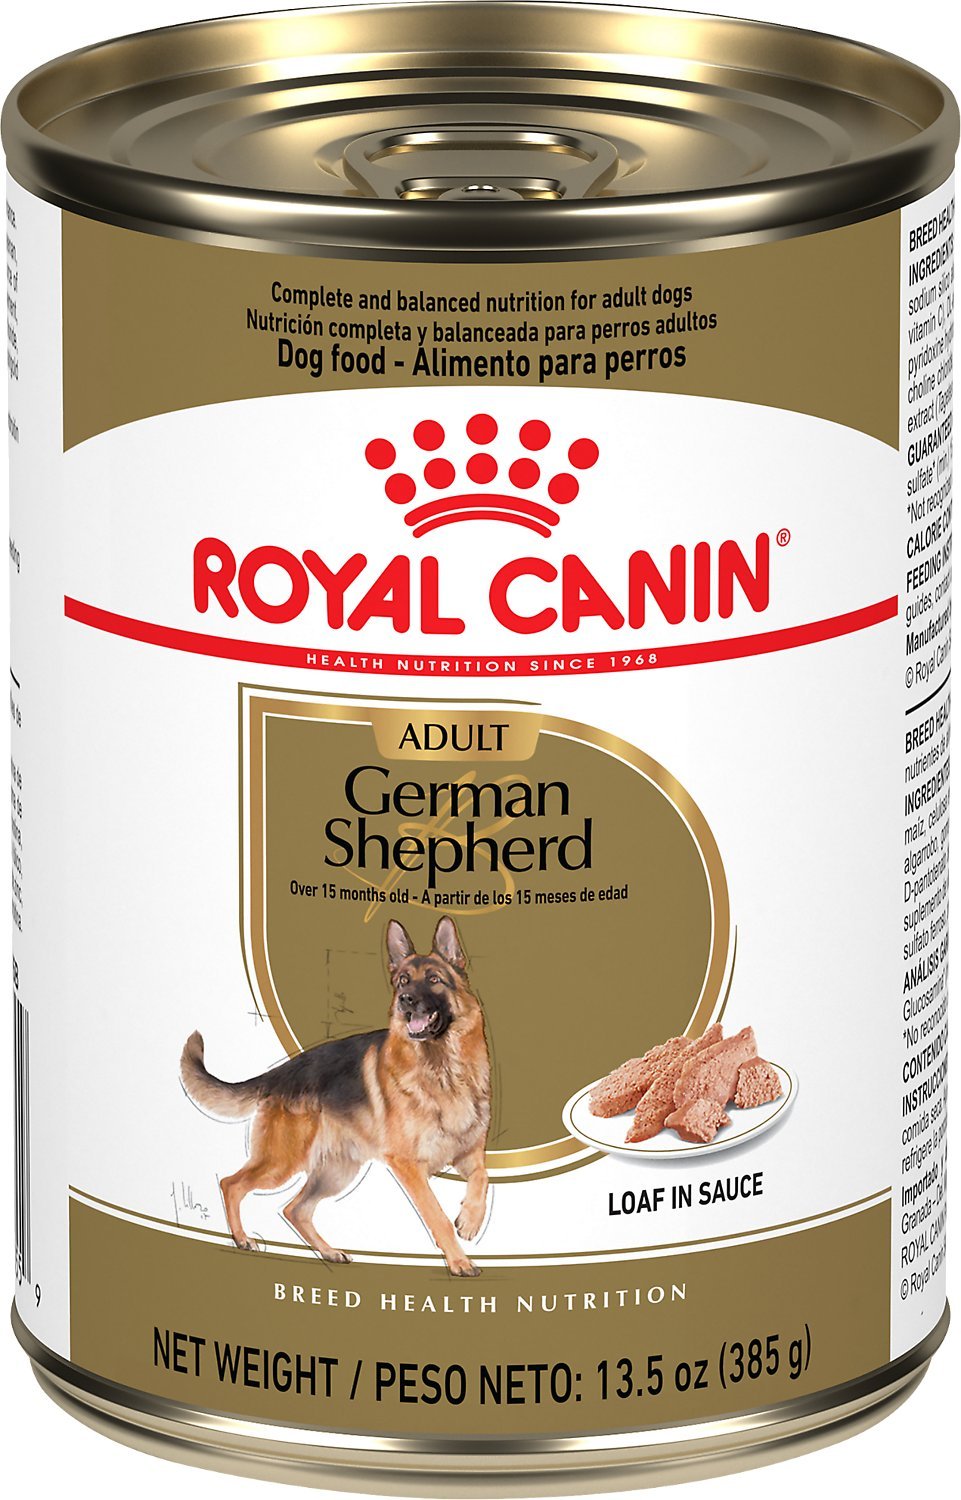 Royal Canin German Shepherd Loaf in Sauce Canned Dog Food, 13.5